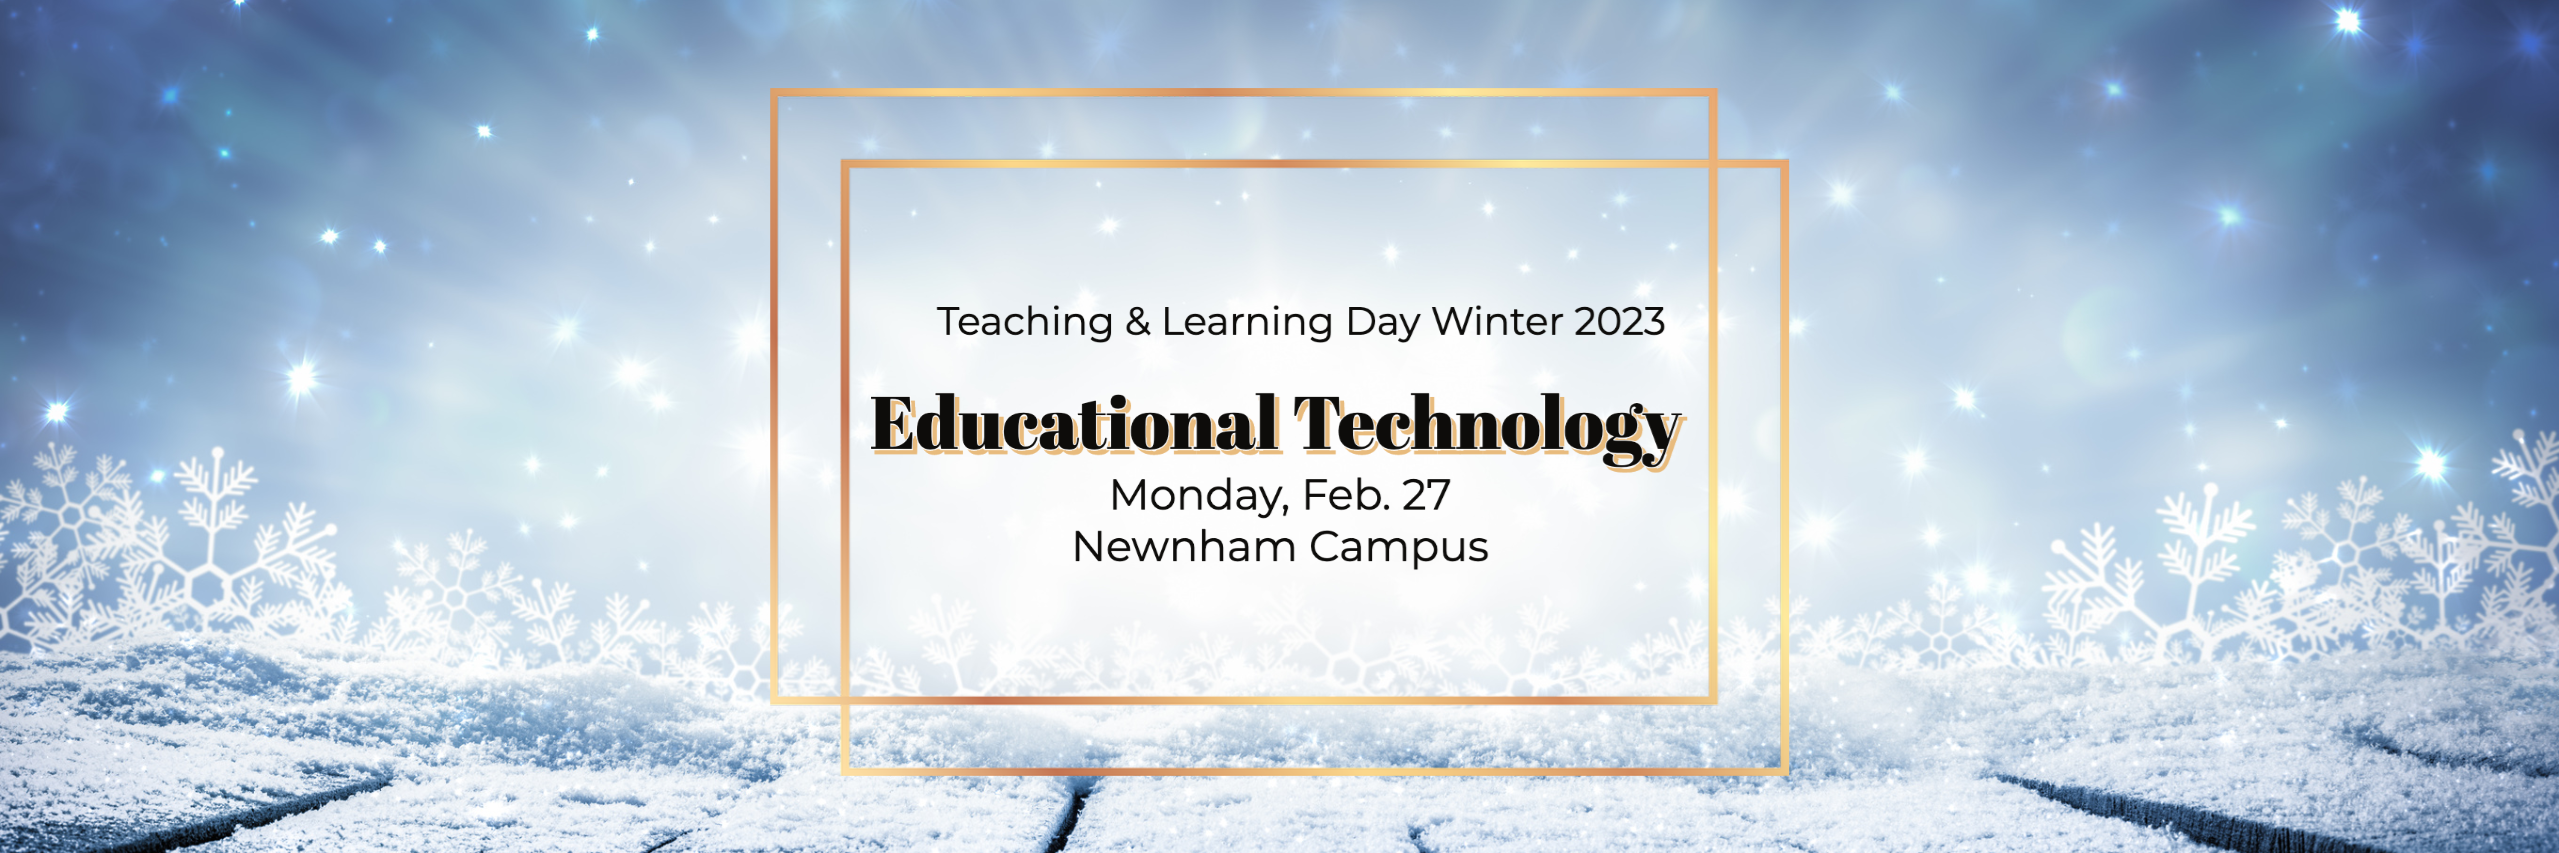 Teaching & Learning Day Winter 2023 is on Monday, February 23 at Newnham Campus. The theme is Educational Technology.